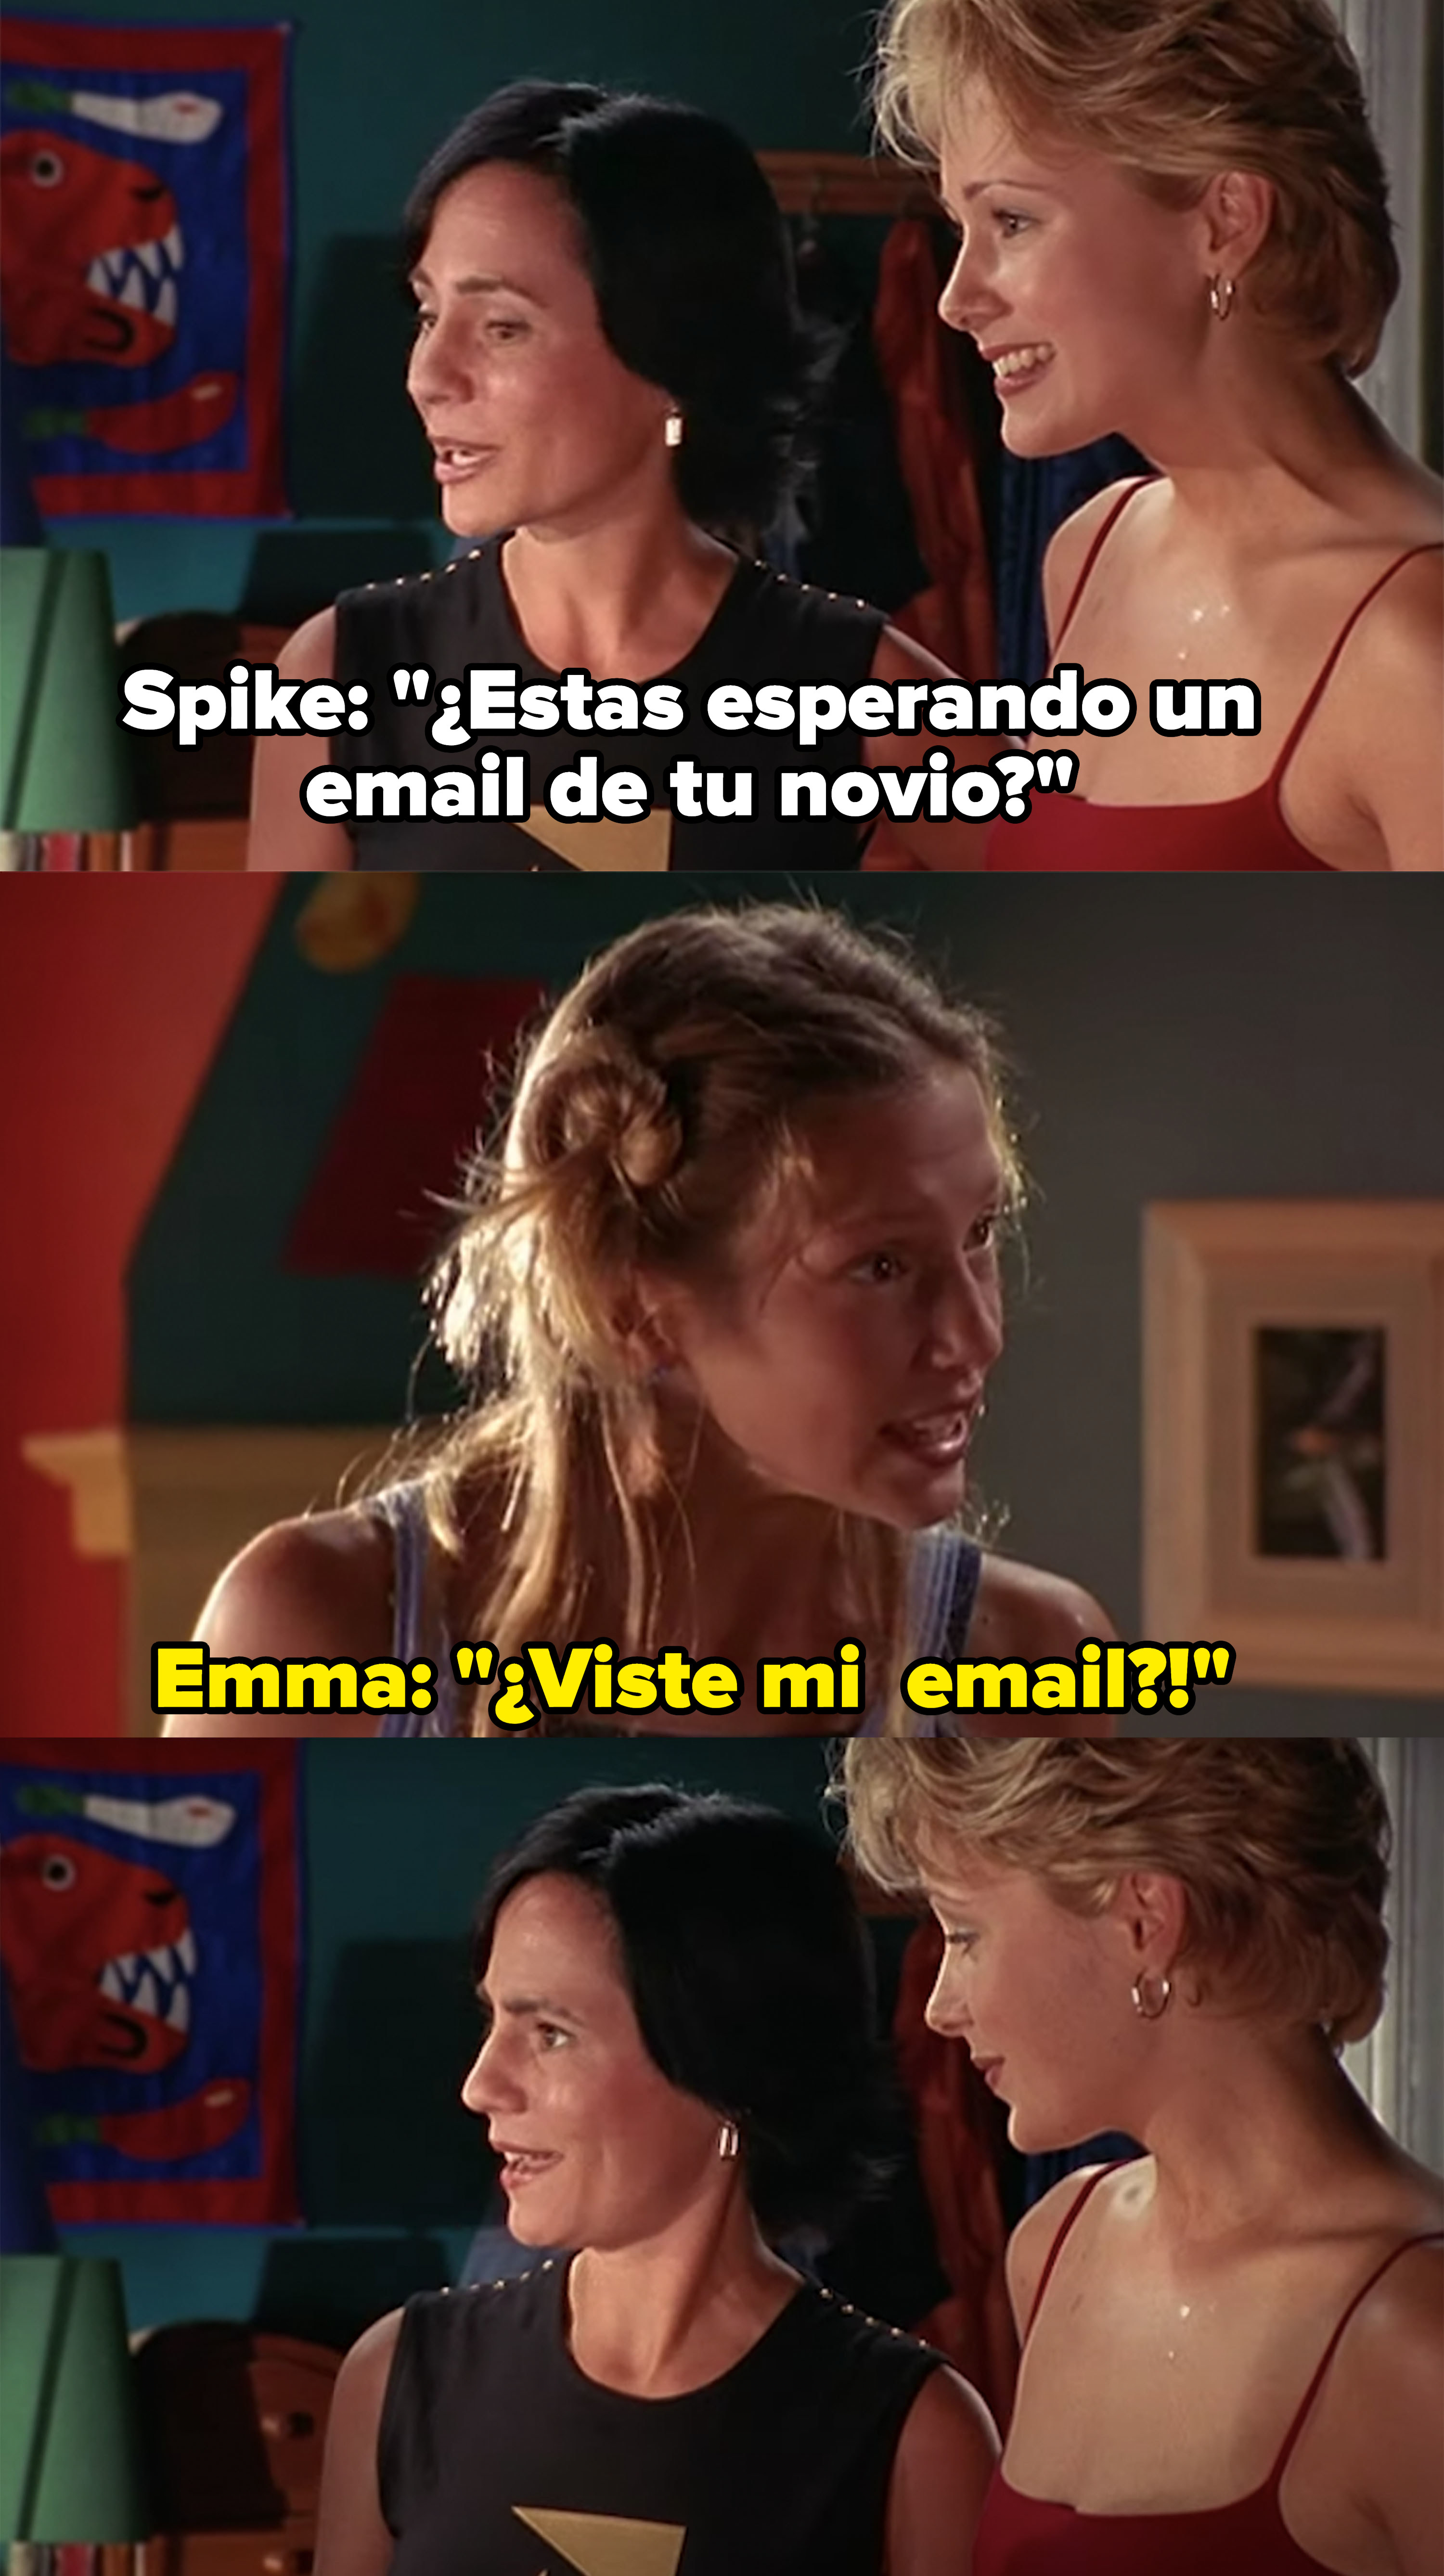 Spike teases Emma about getting an email from her boyfriend